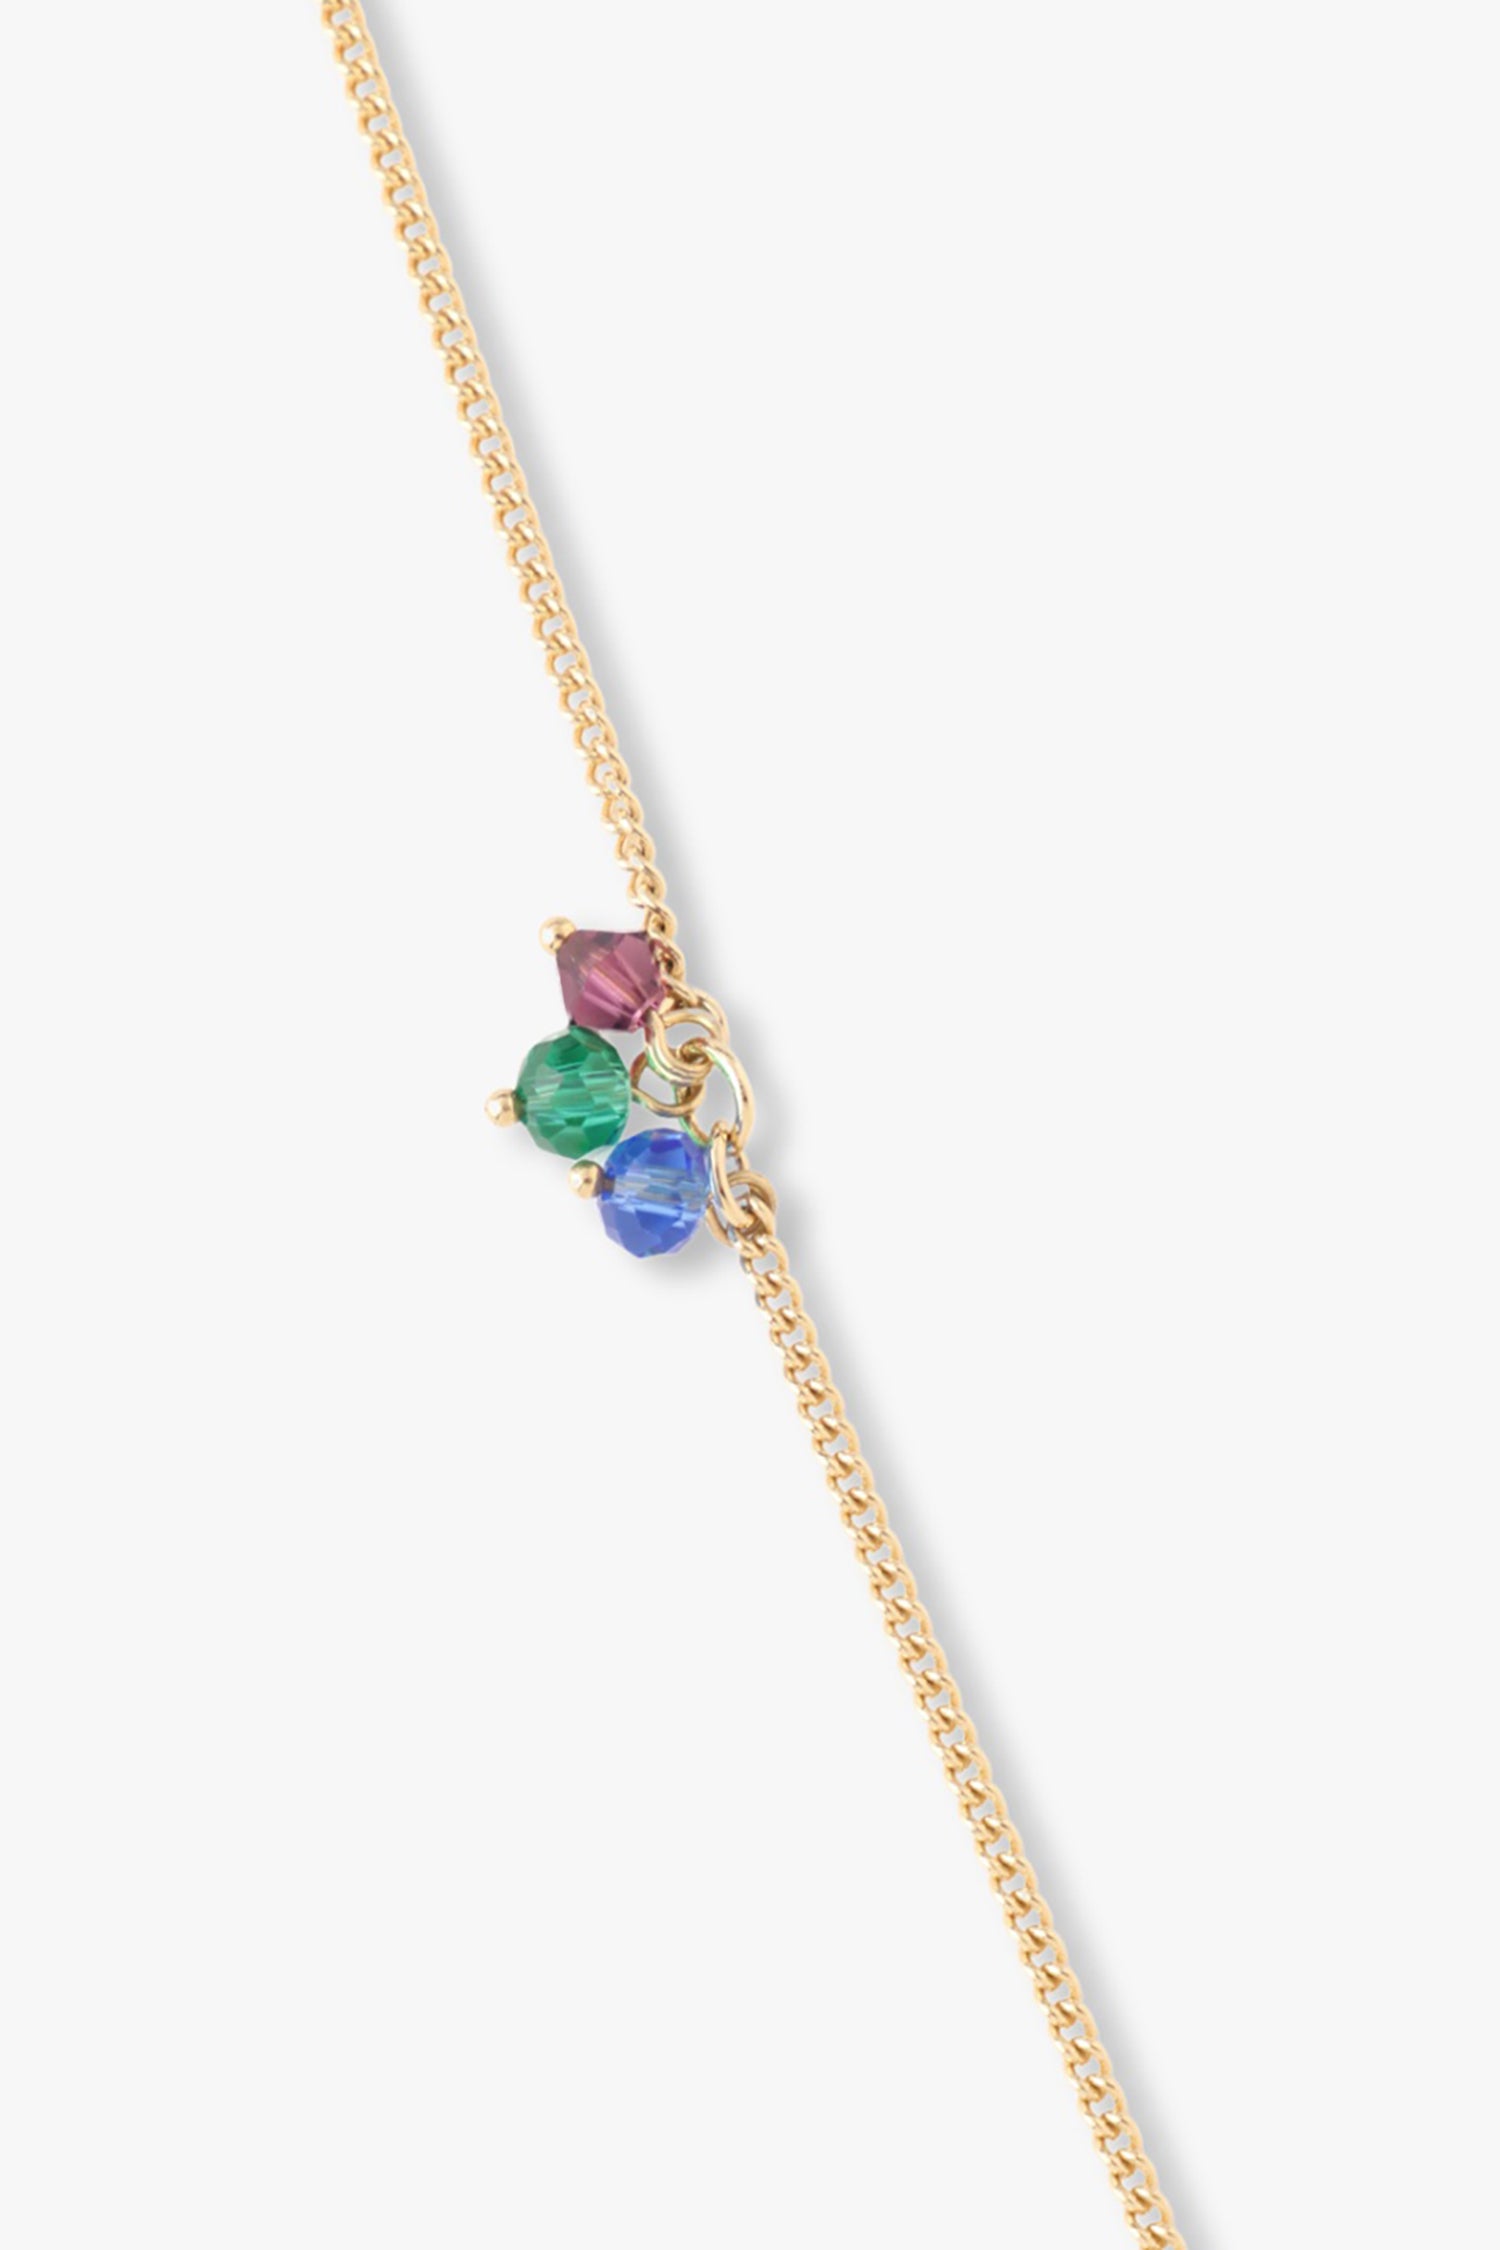 Detail of the hanging gem on the chain, red, green, blue, hanged on Lage links